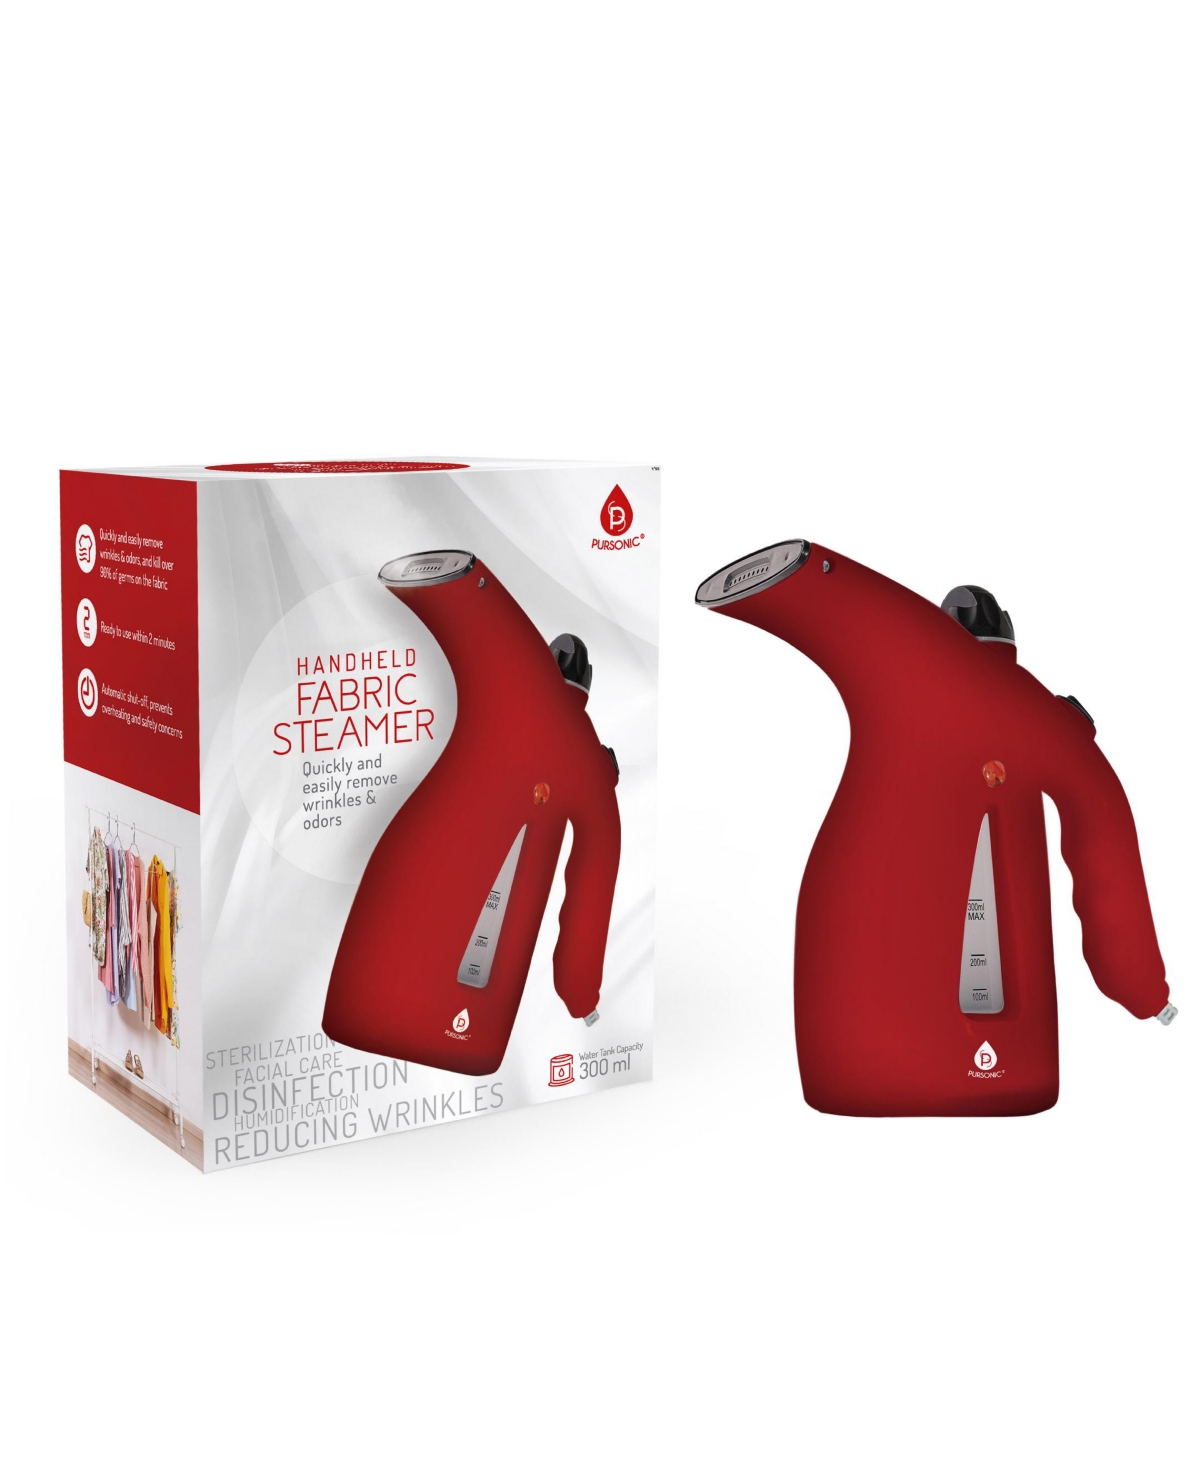 300ml Handheld Fabric Fast 2 Minute Heat-up Powerful Travel Clothes Garment Steamer. - Bright Red